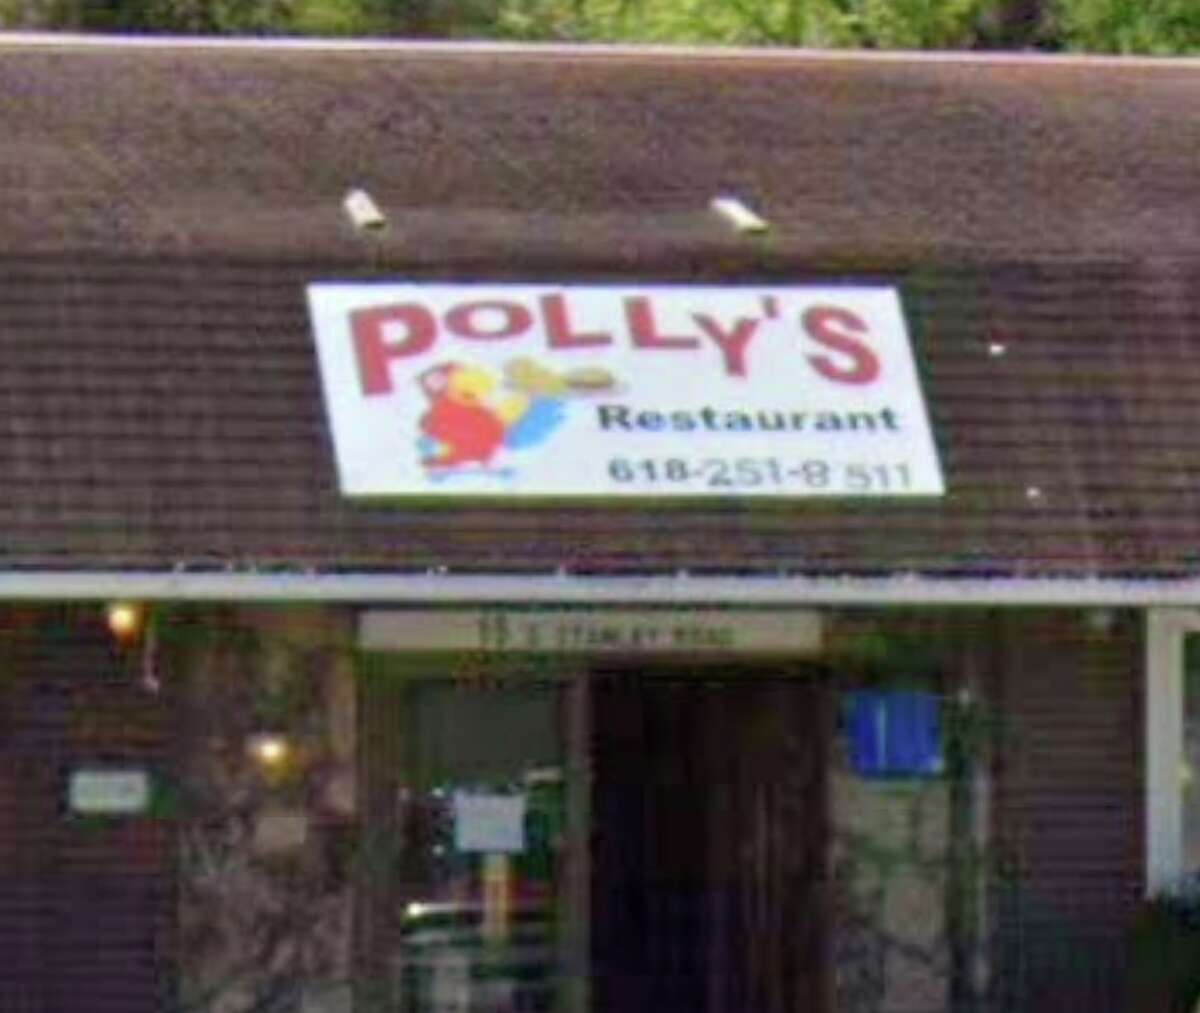 Polly's, 15 S. Stanley Road, Cottage Hills: The food won't be the only great experience you'll have at Polly's — the staff is widely noted for their excellent customer service.